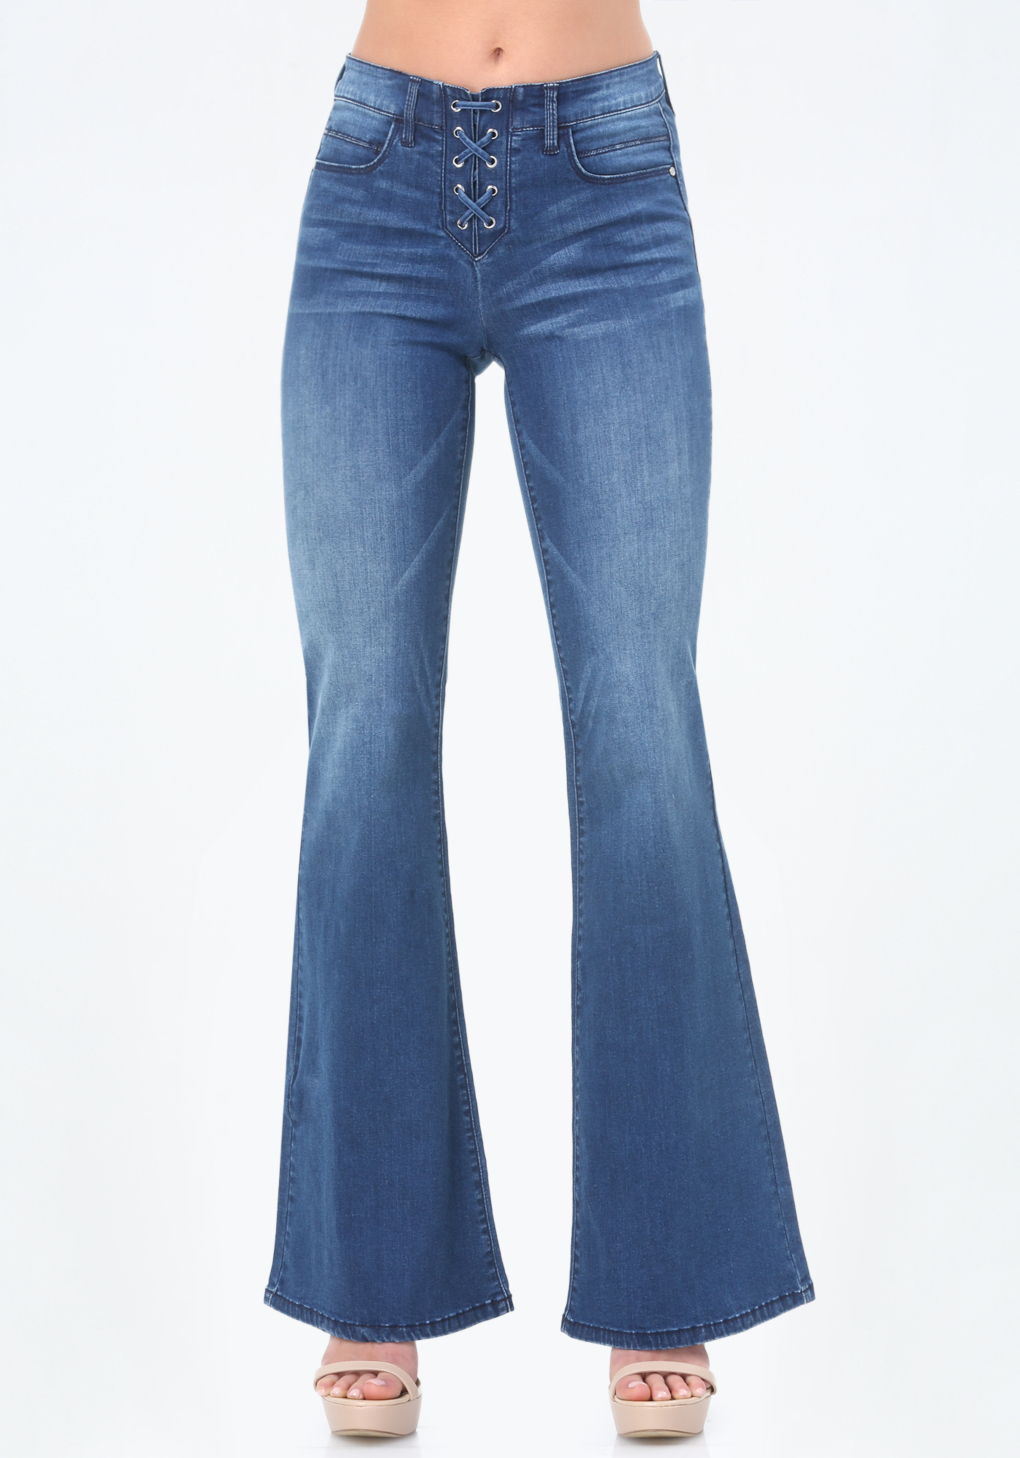 Bebe Lace Up Flared Jeans in Blue - Lyst